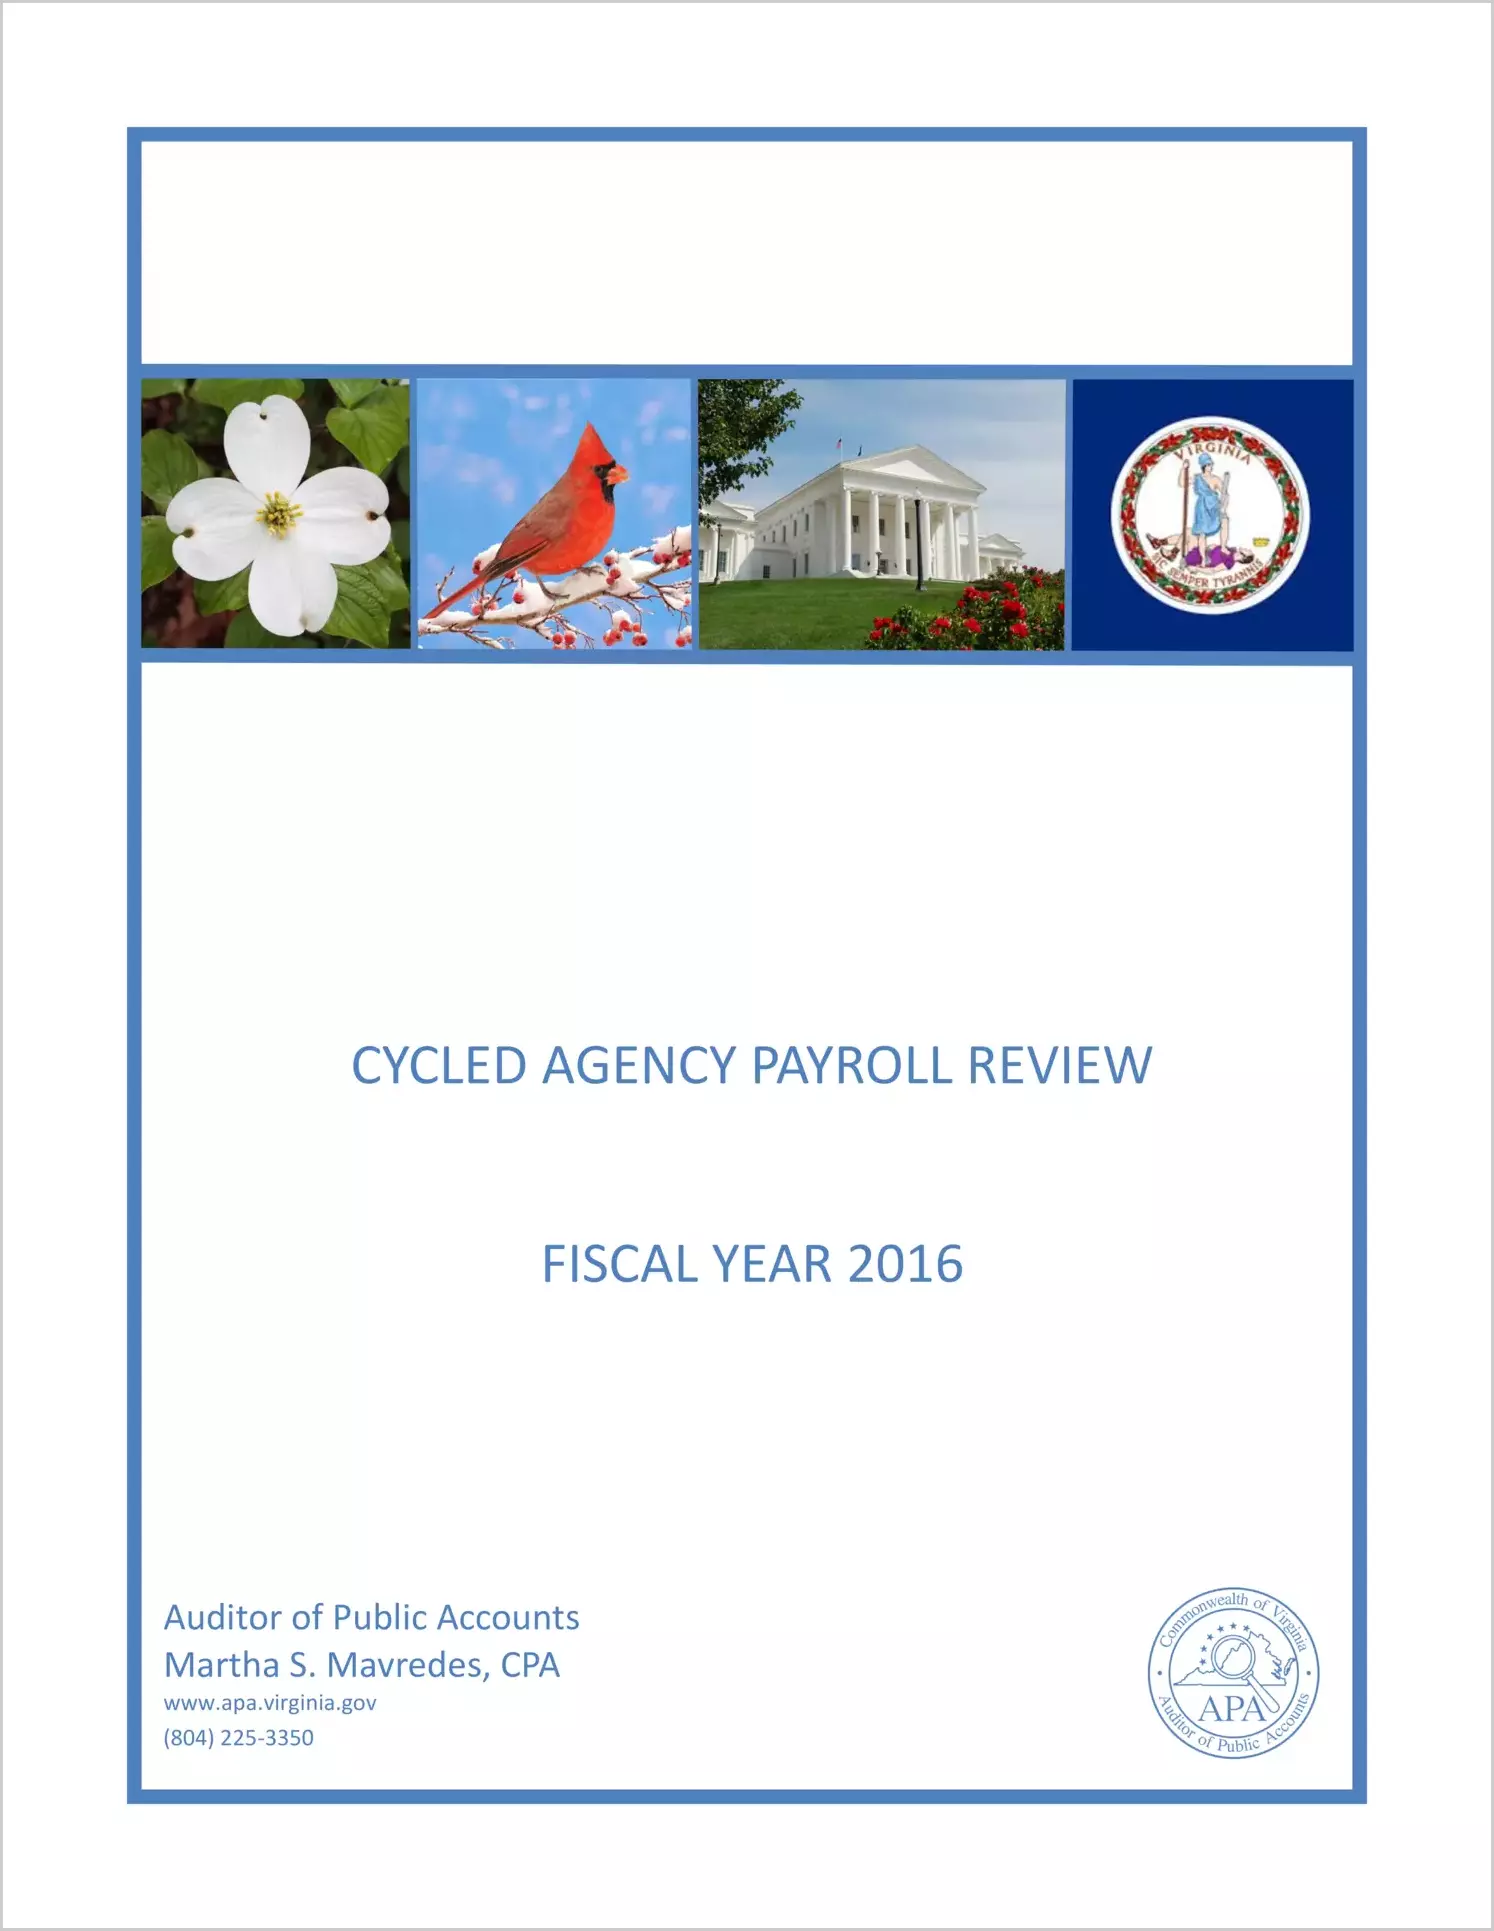 Cycled Agency Payroll Review Fiscal Year 2016